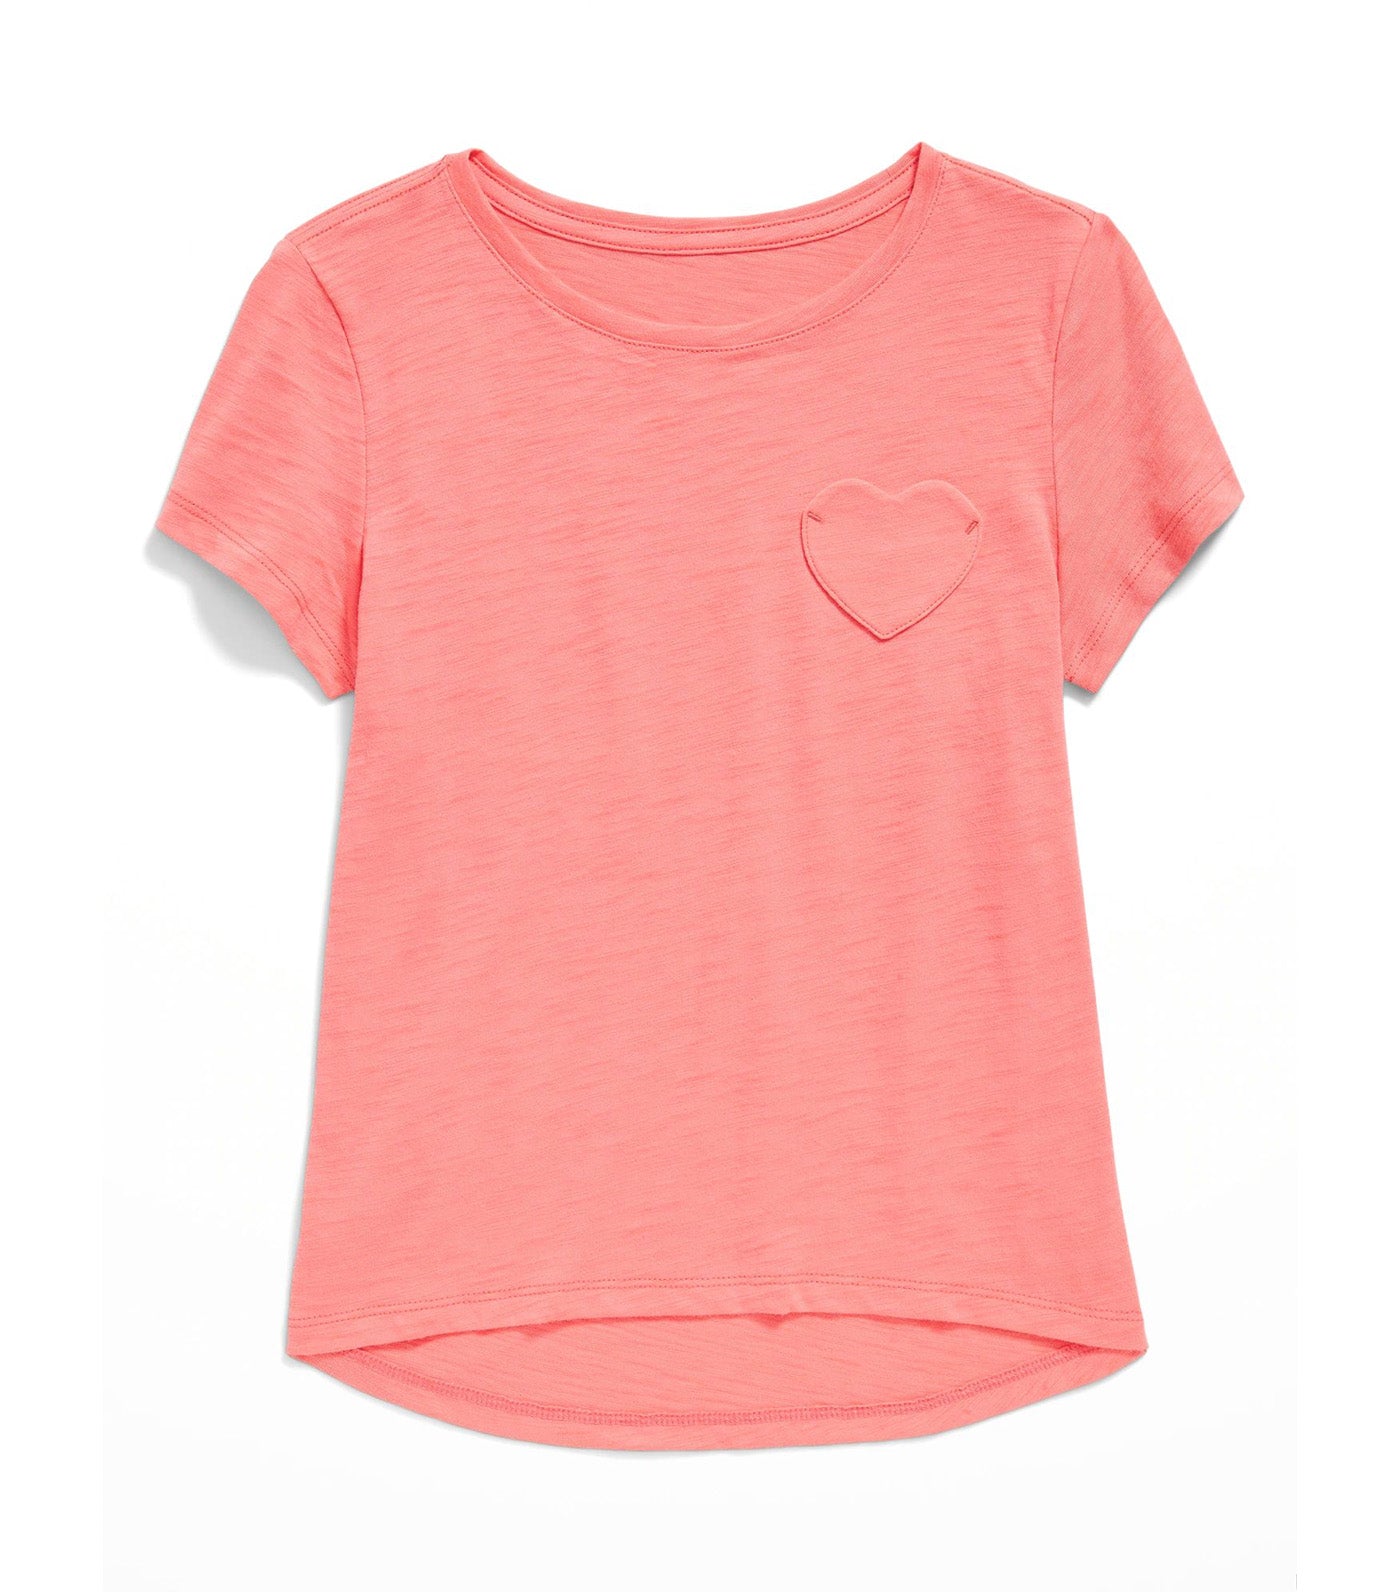 Softest Heart-Pocket T-Shirt for Girls - Coral Punch Neon